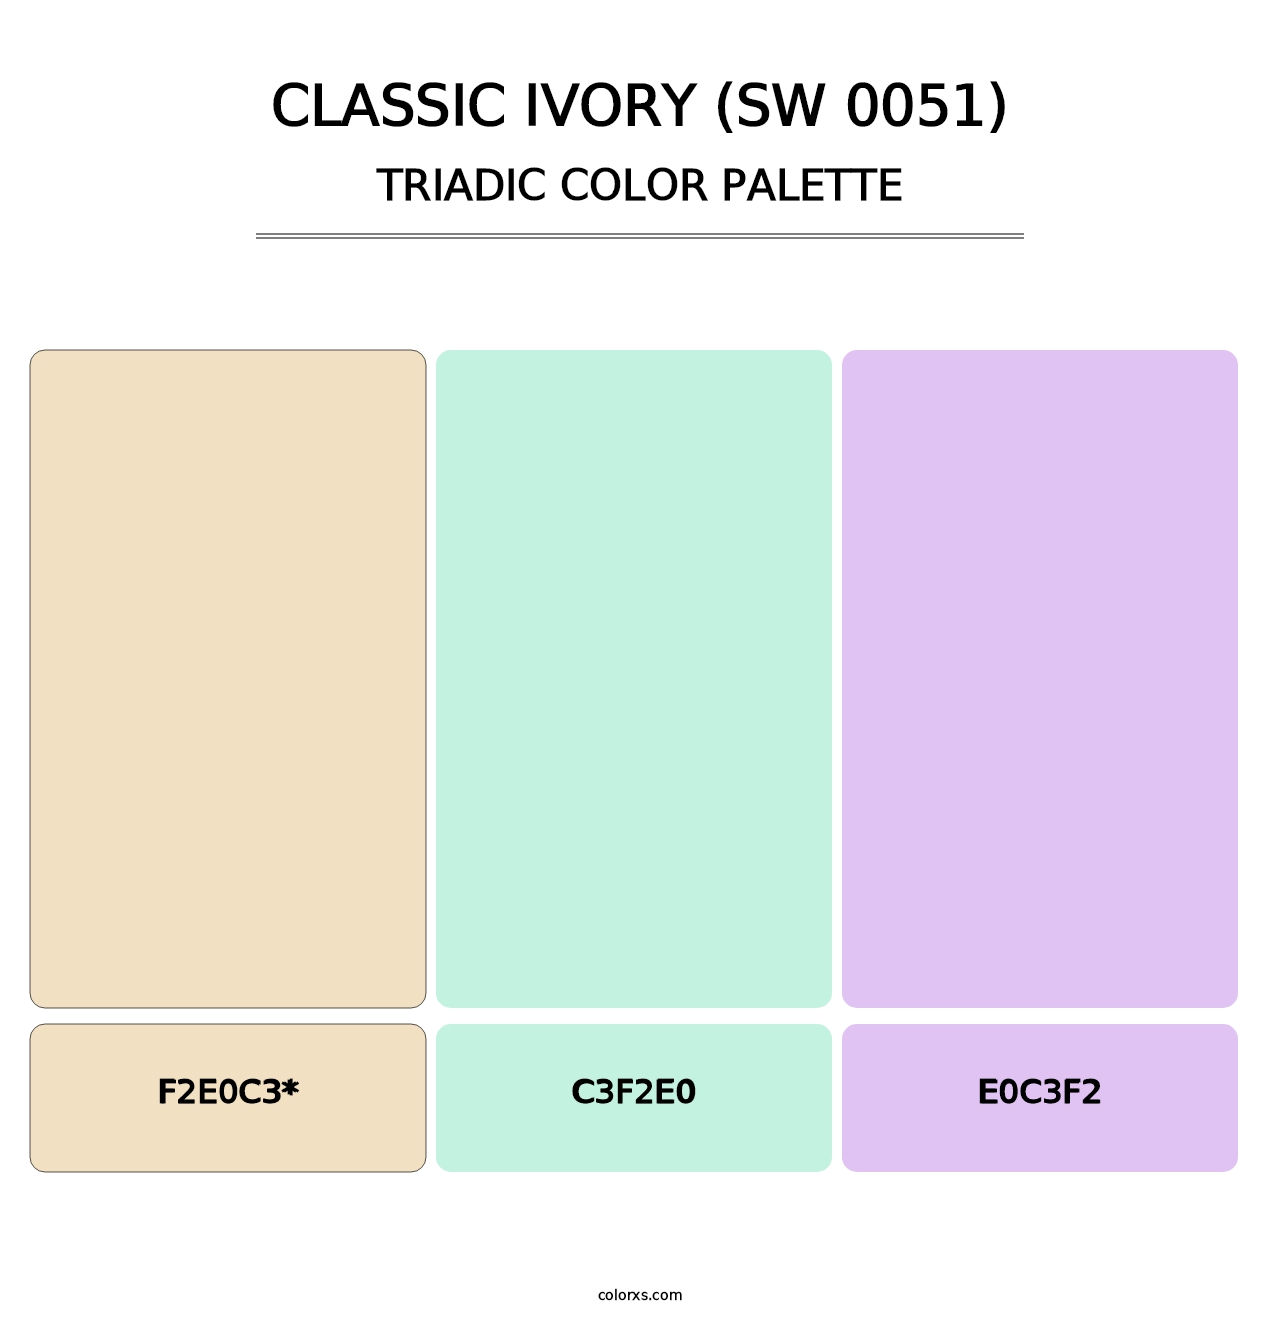 Classic Ivory (SW 0051) - Triadic Color Palette